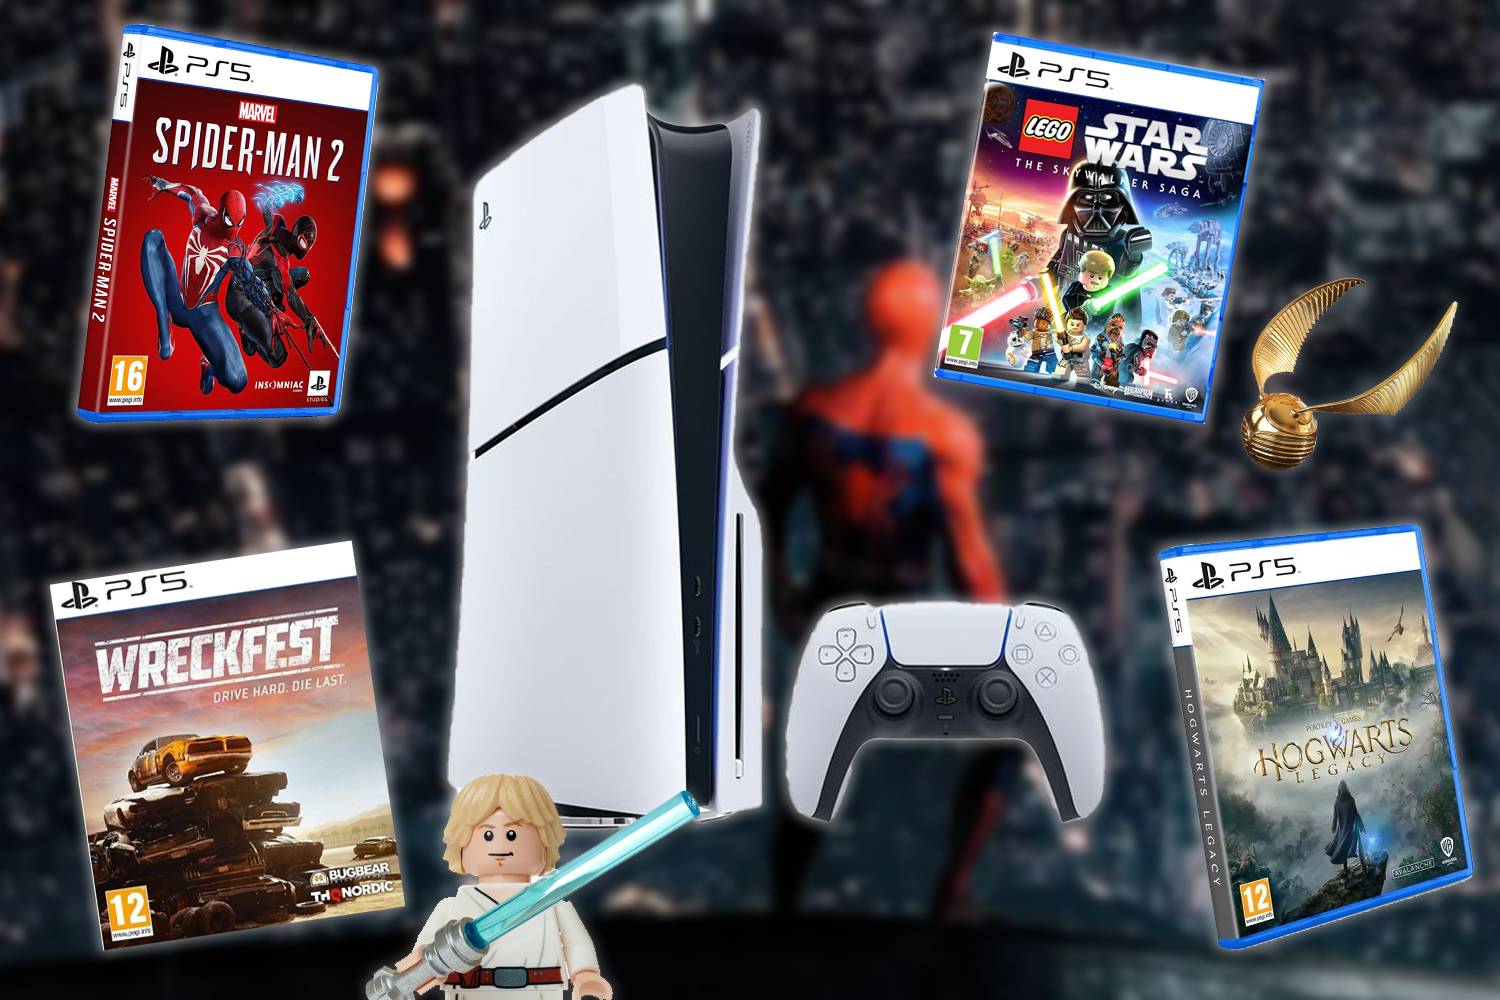 Win this Playstation 5 and Game Bundle